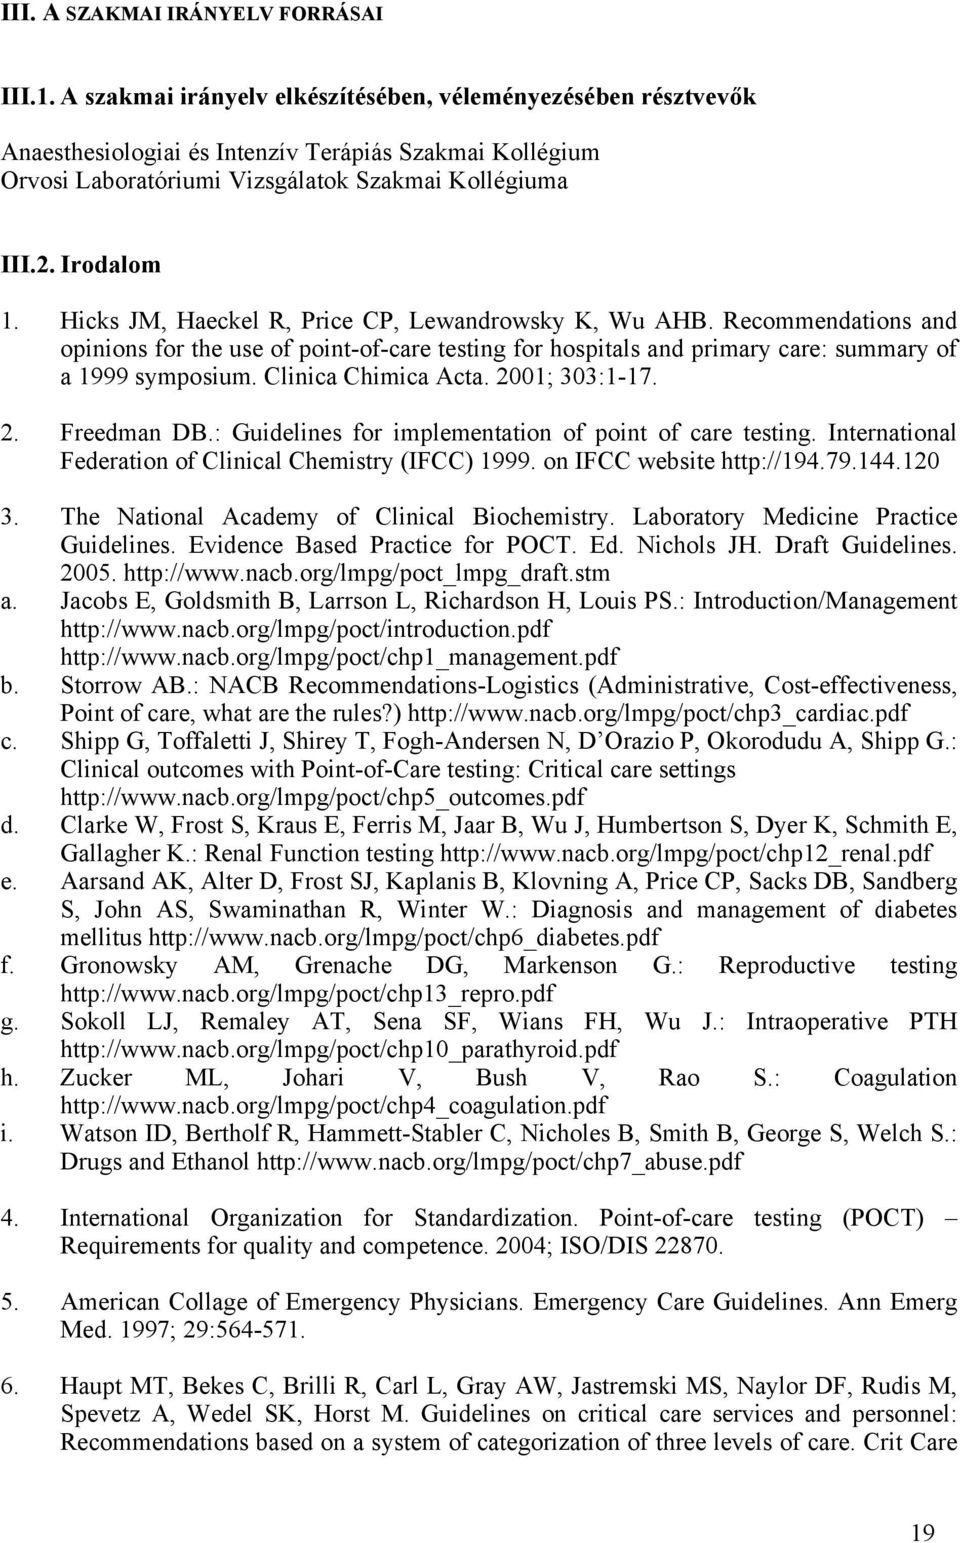 Hicks JM, Haeckel R, Price CP, Lewandrowsky K, Wu AHB. Recommendations and opinions for the use of point-of-care testing for hospitals and primary care: summary of a 1999 symposium.